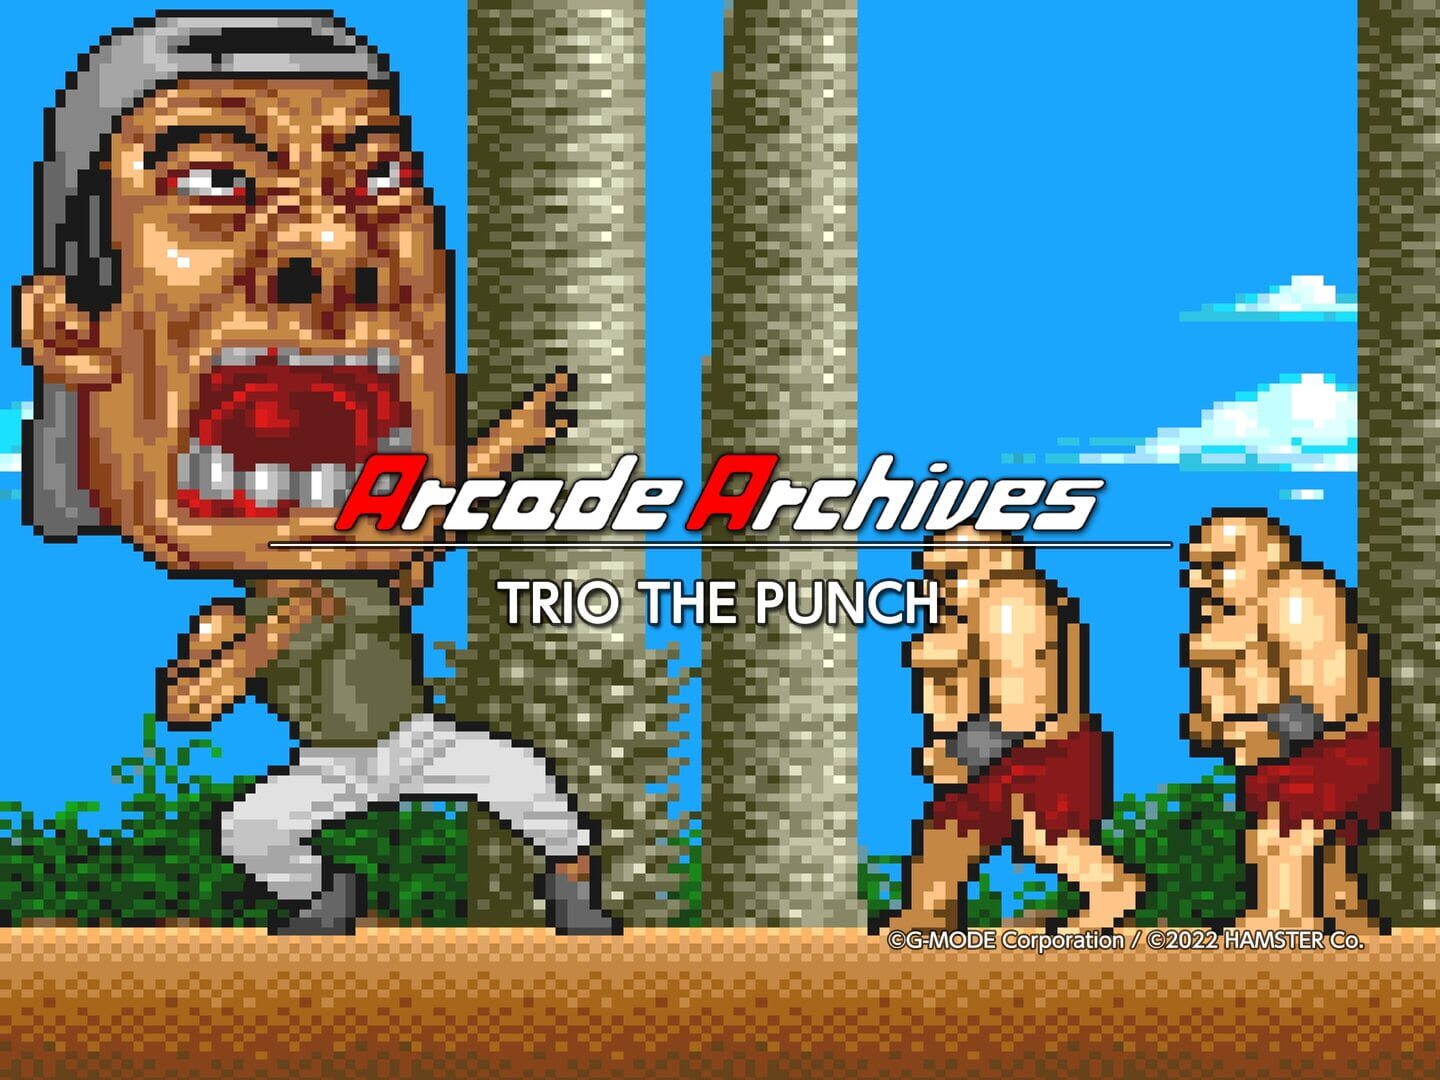 Arcade Archives: Trio the Punch artwork